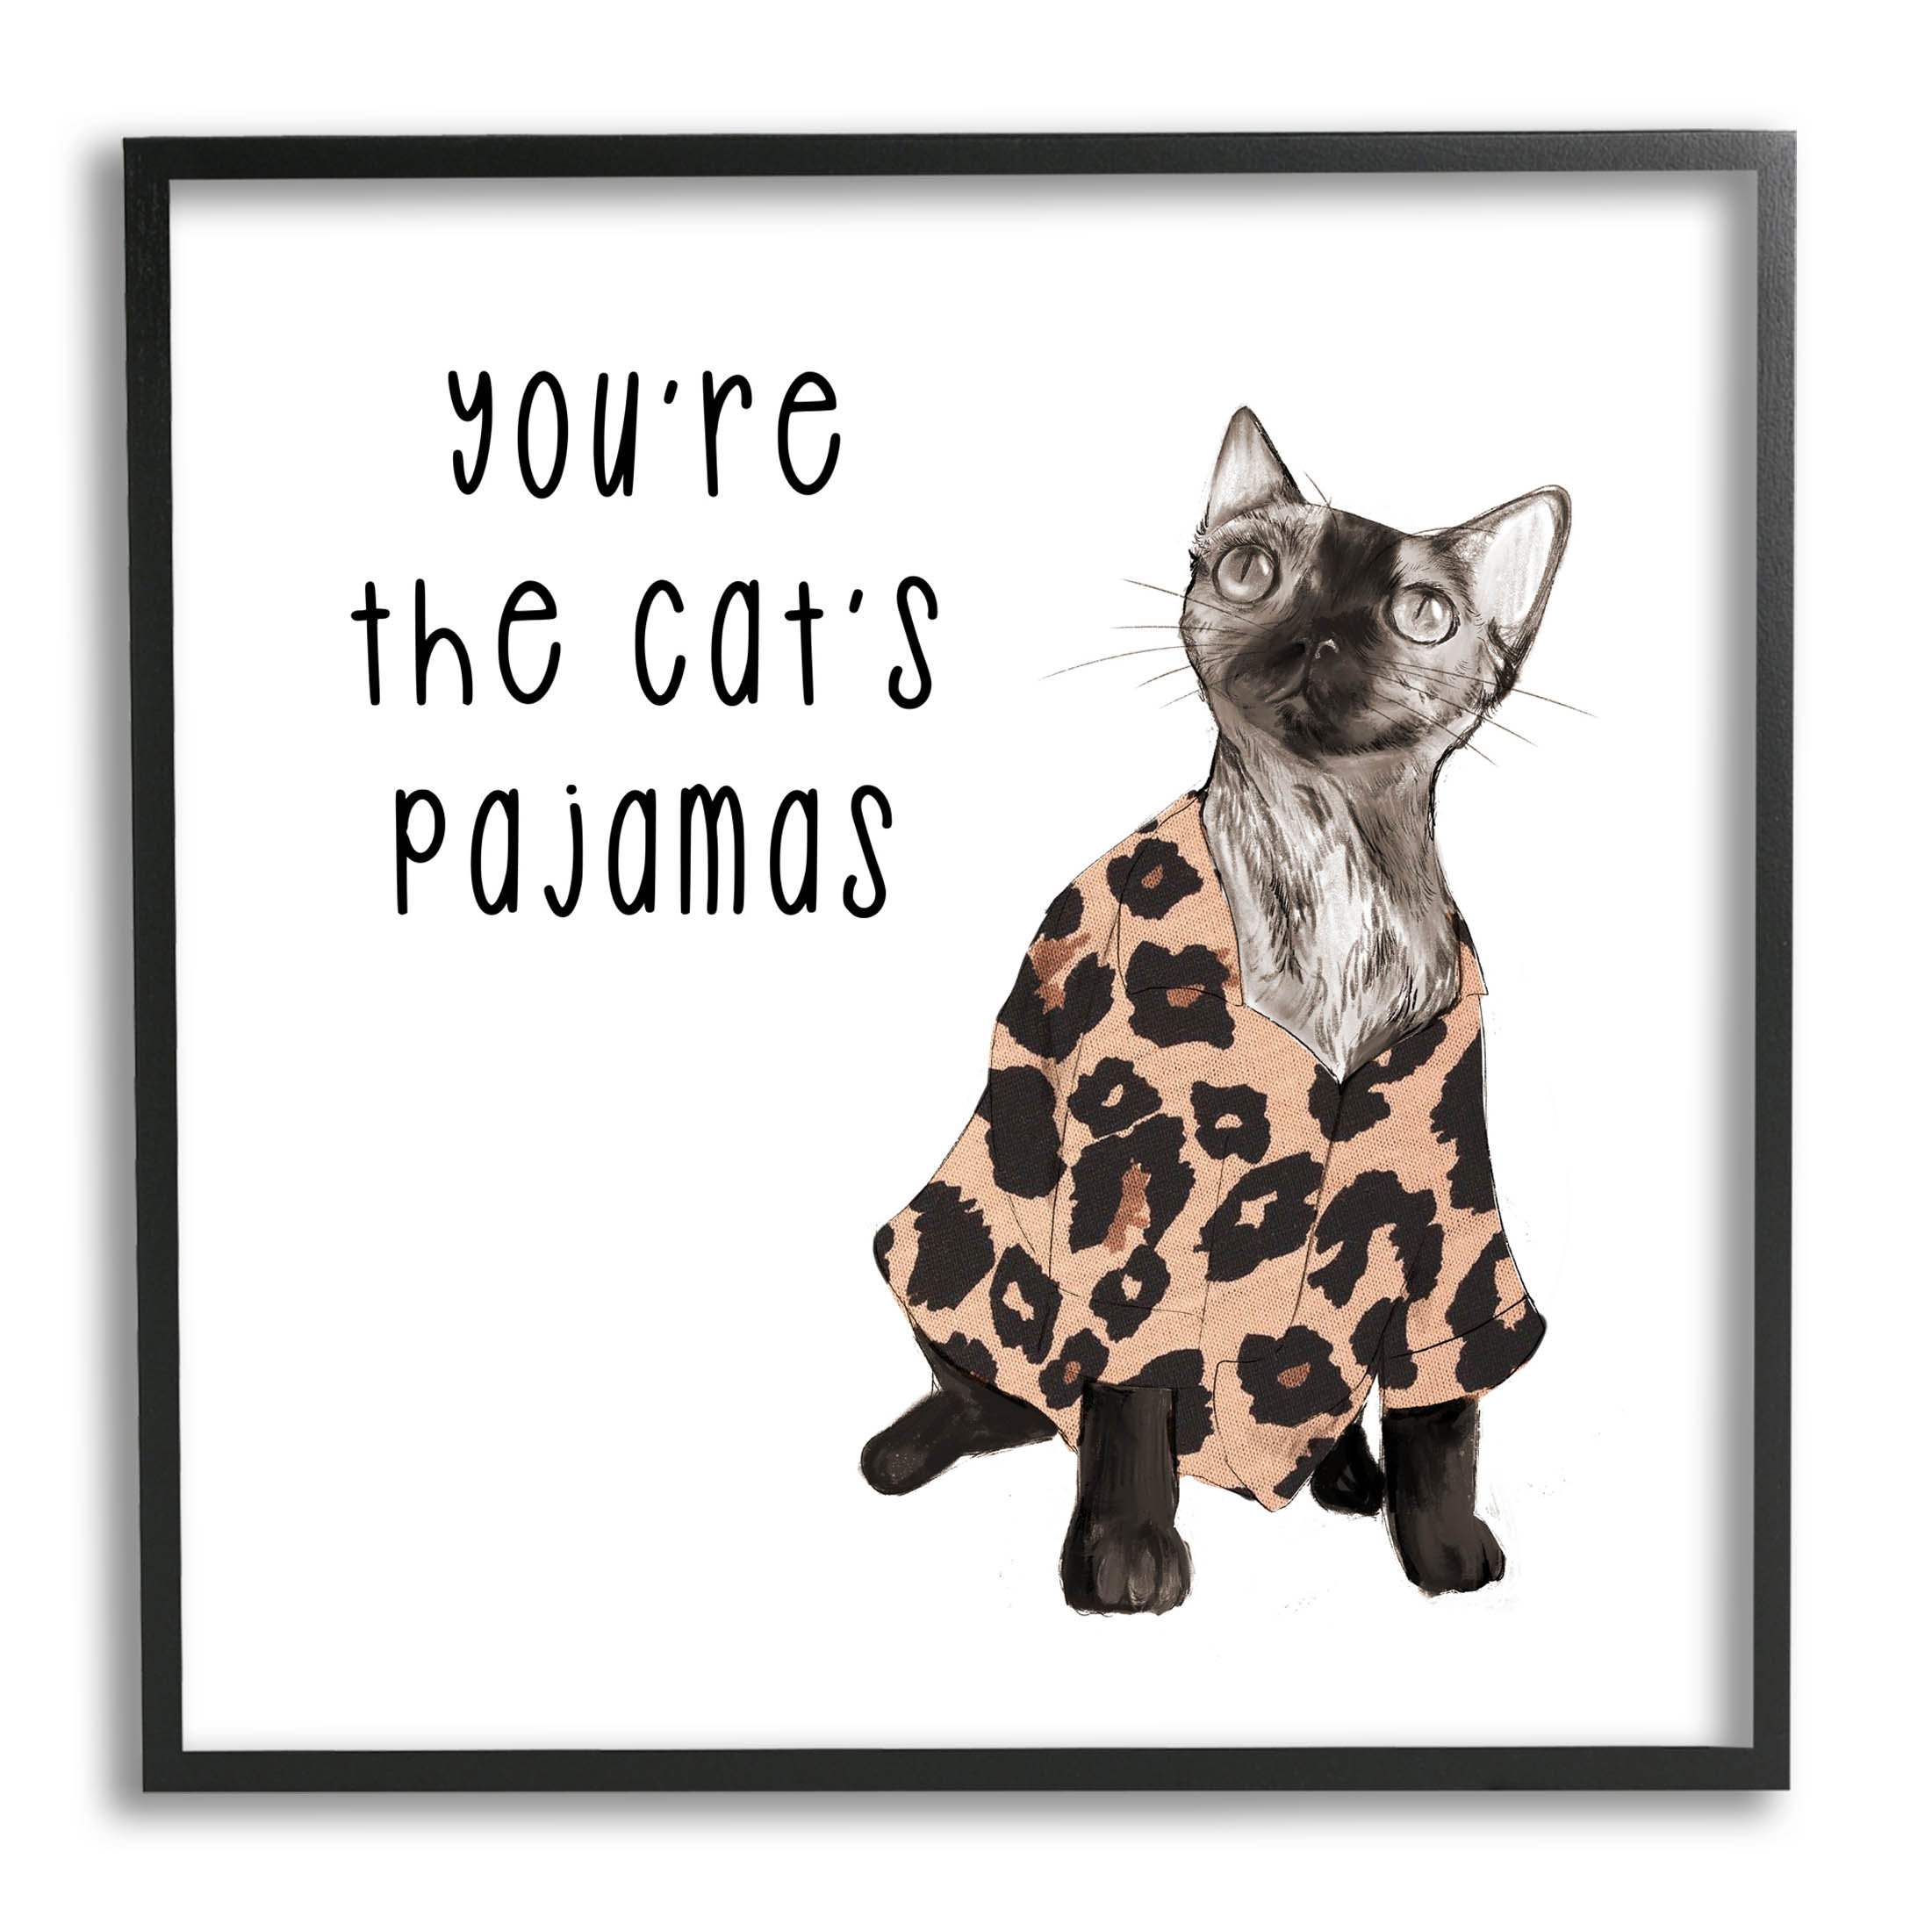 The Cat's Pajamas Humor Framed On Canvas by Lil' Rue Textual Art